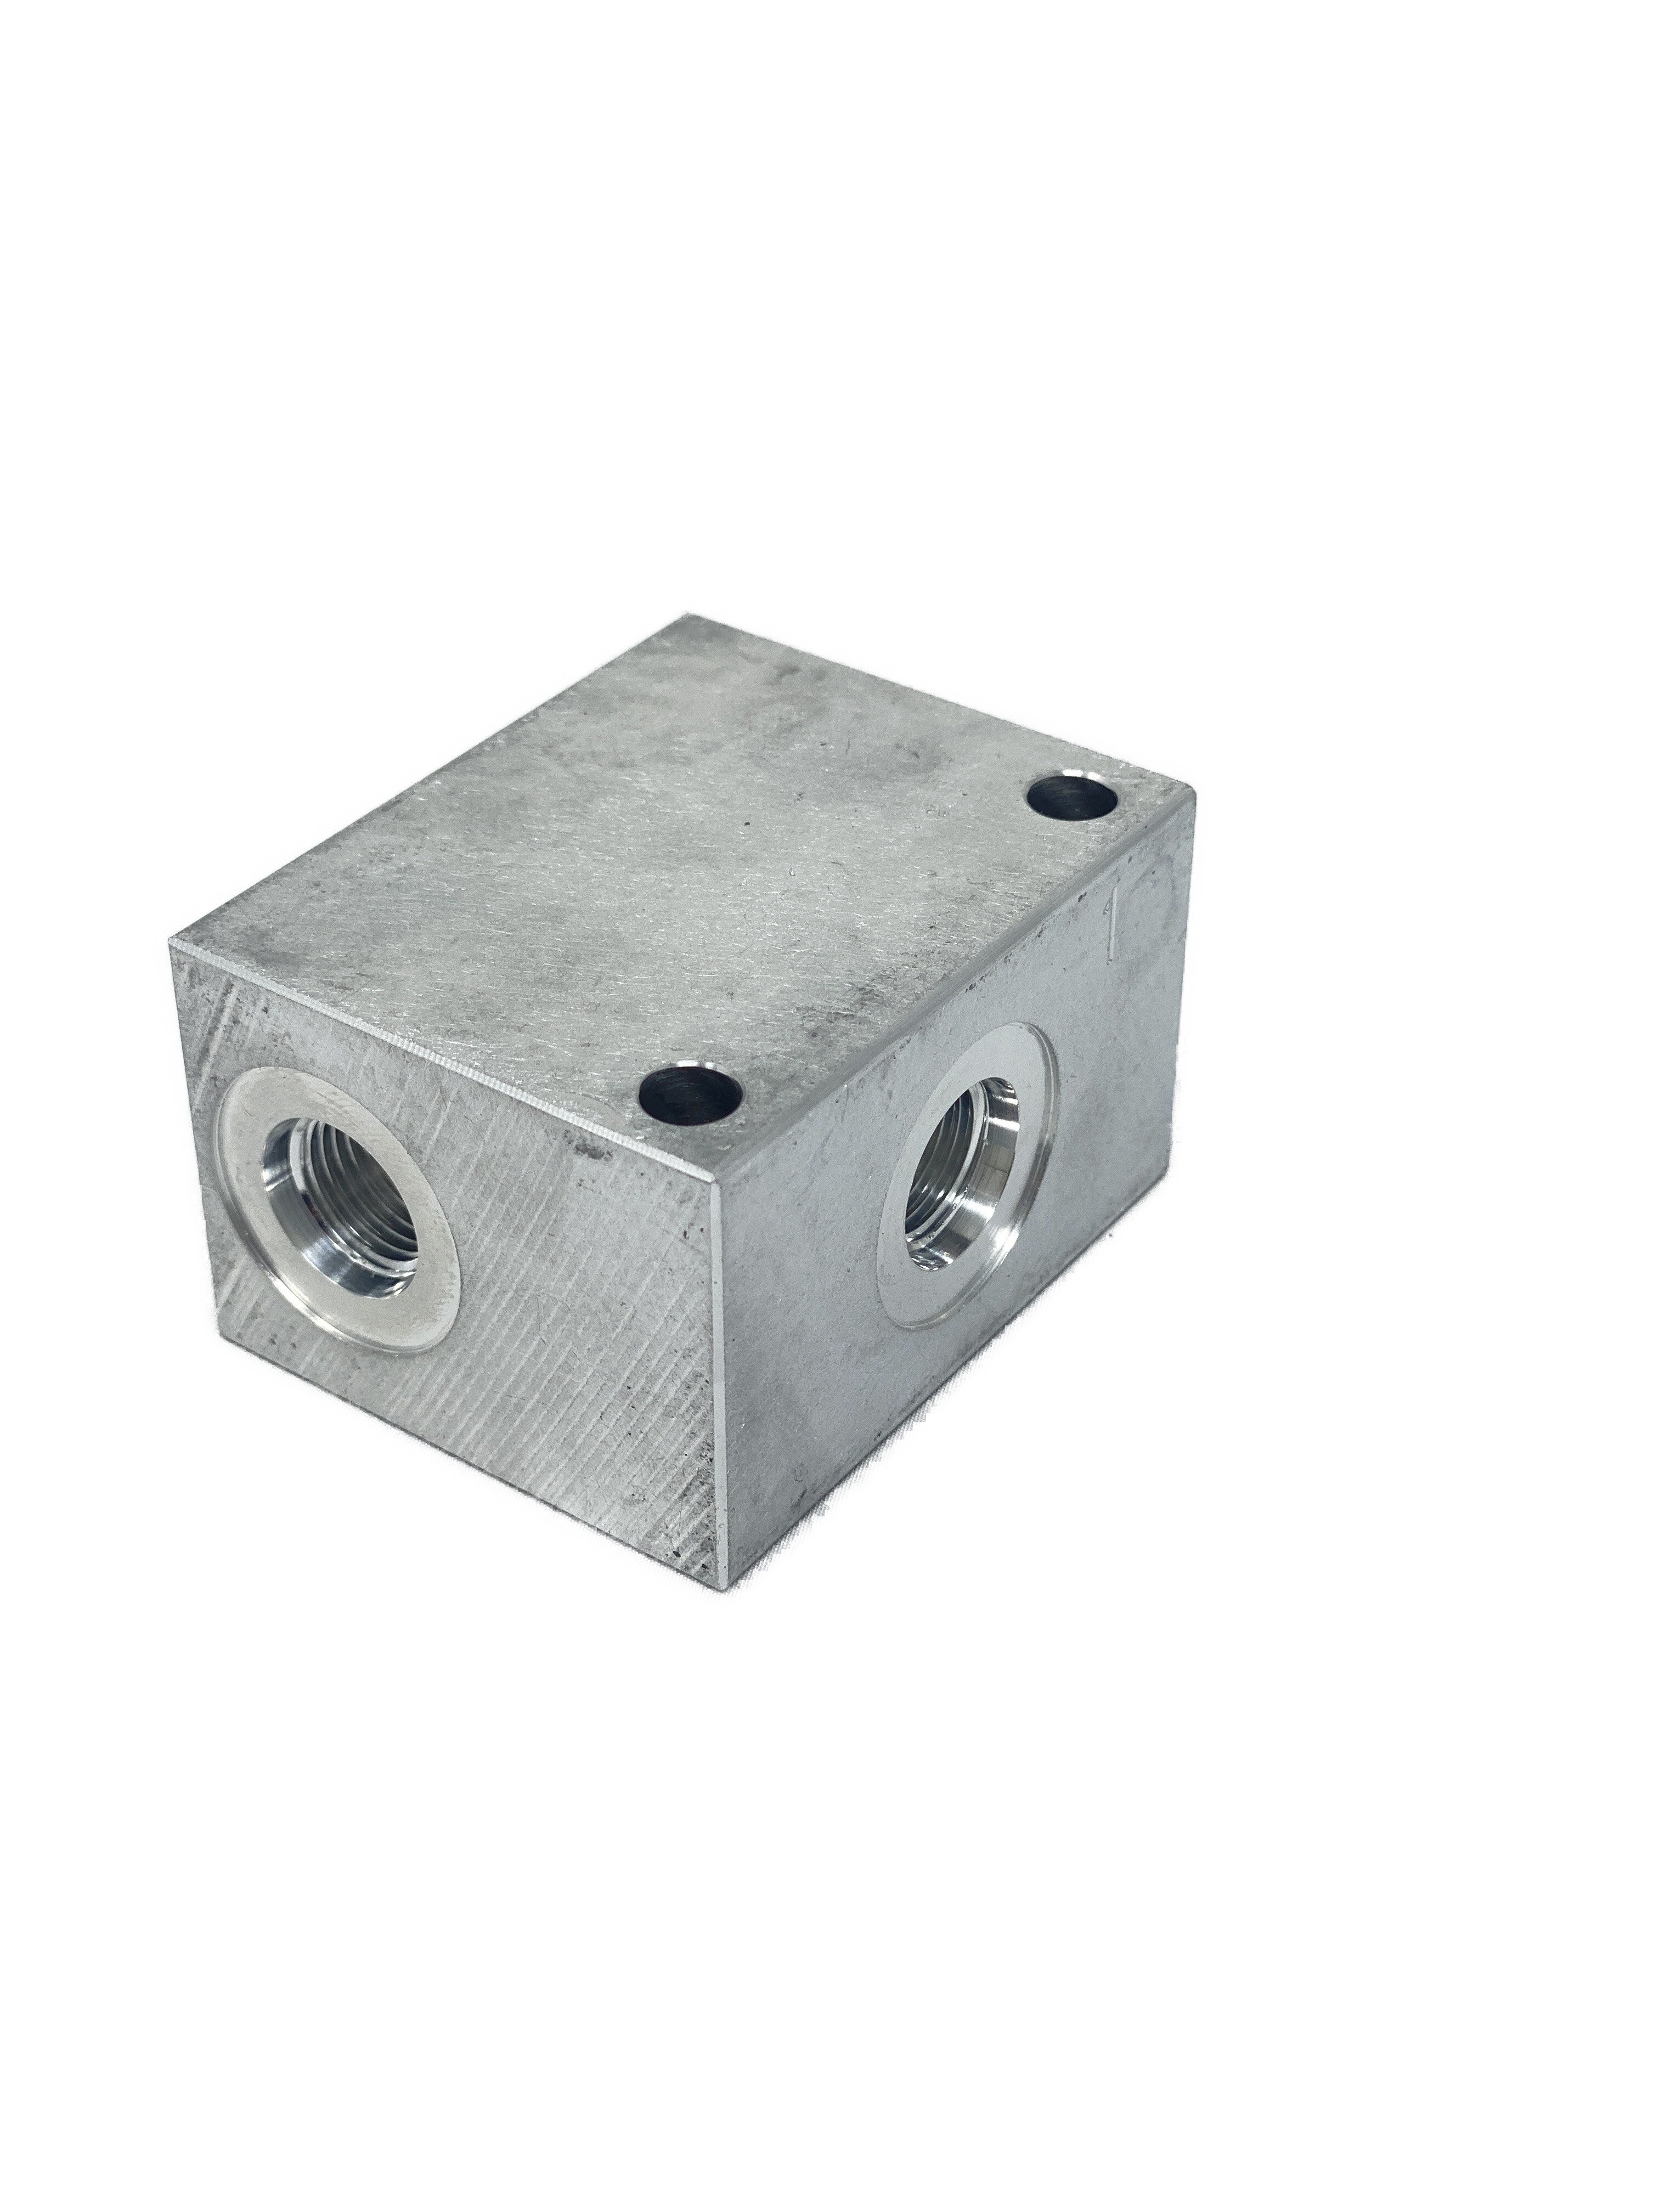 AC102CB8S : Daman Common Cavity Body, C-10-2 Cartridge Cavity, #8 SAE (1/2") Port Connections, 3000psi Rated, Aluminum, Without Gauge Port